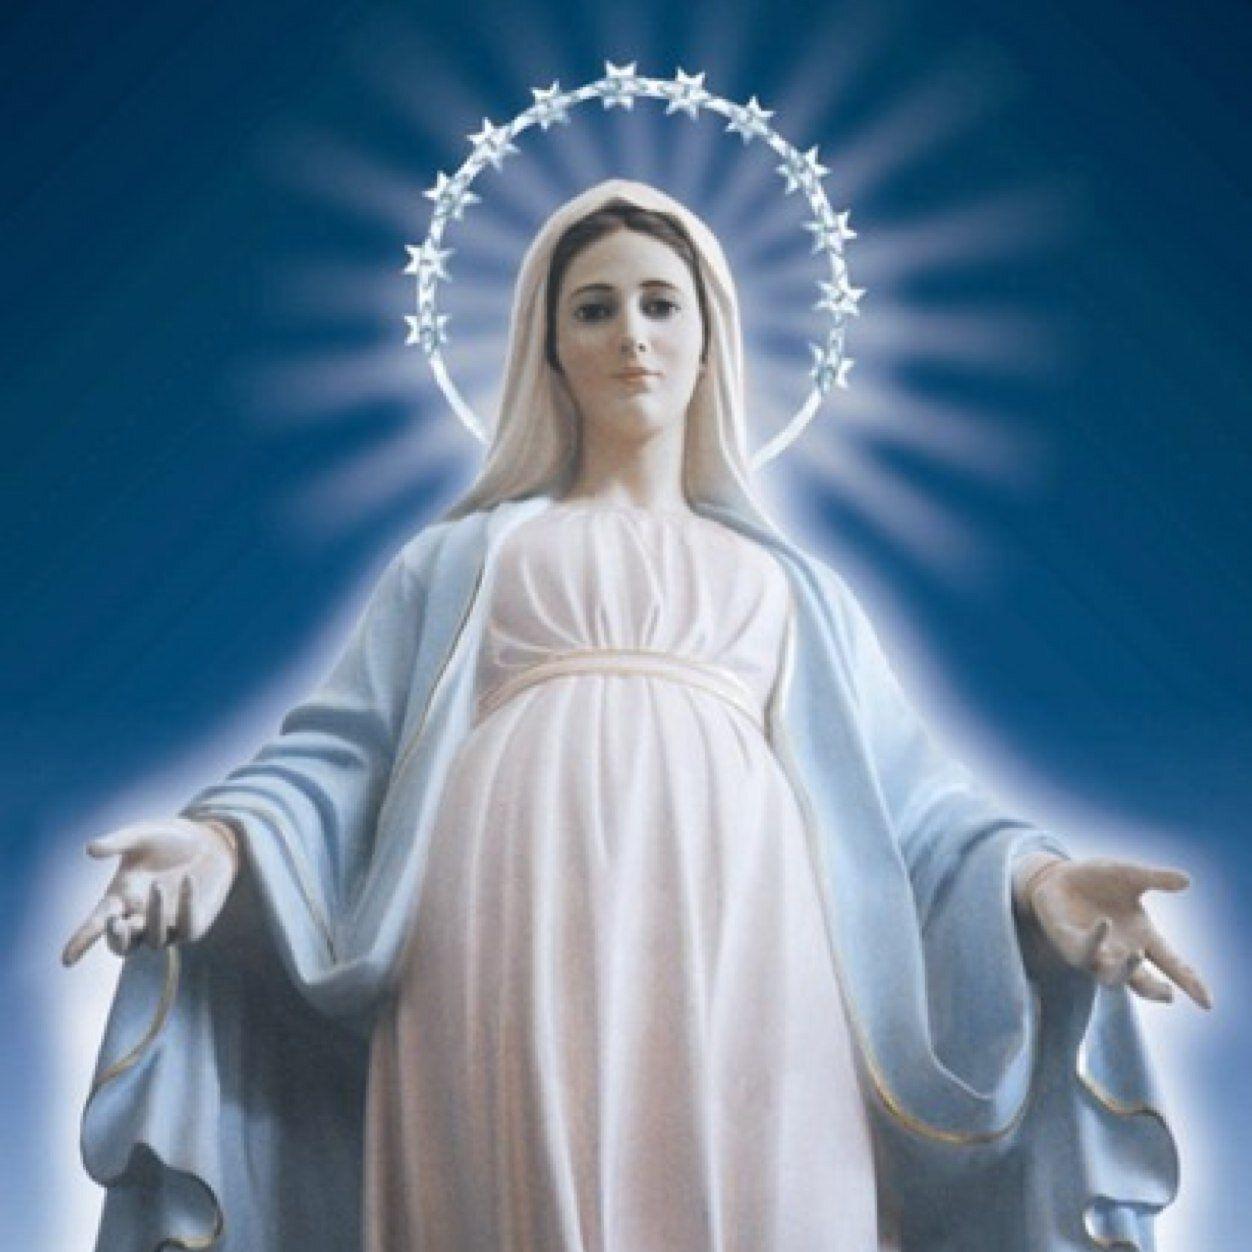 Mary wallpaper, Religious, HQ Mary pictureK Wallpaper